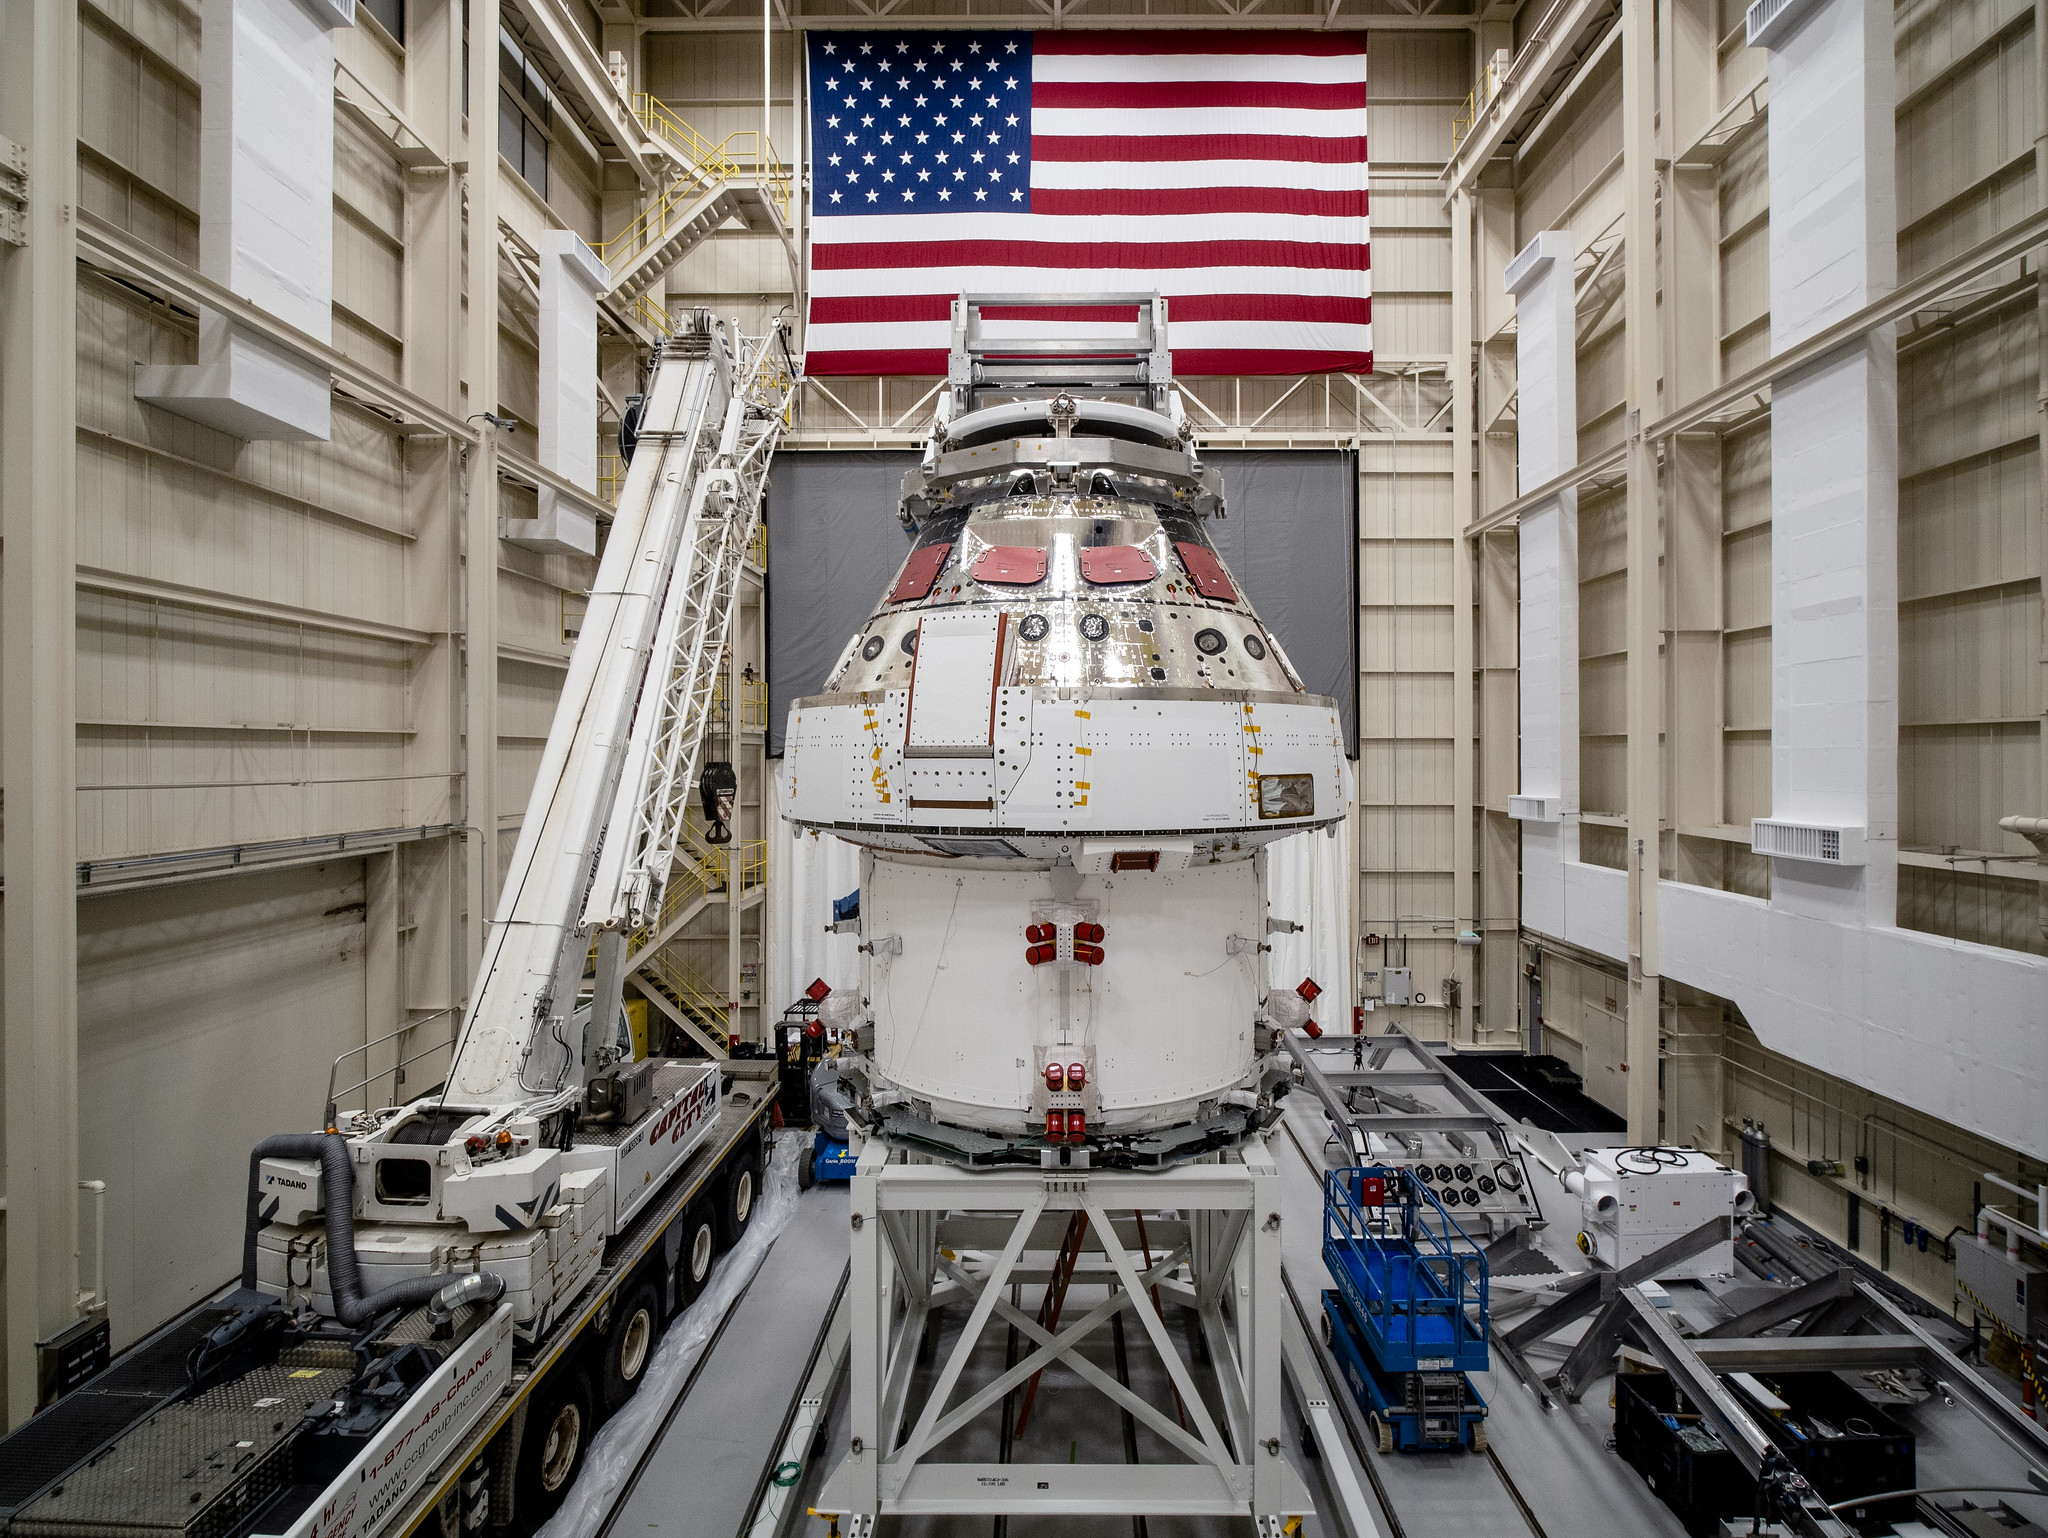 NASA’s Orion spacecraft for the Artemis I mission was lifted into a thermal cage on December 2, 2020.